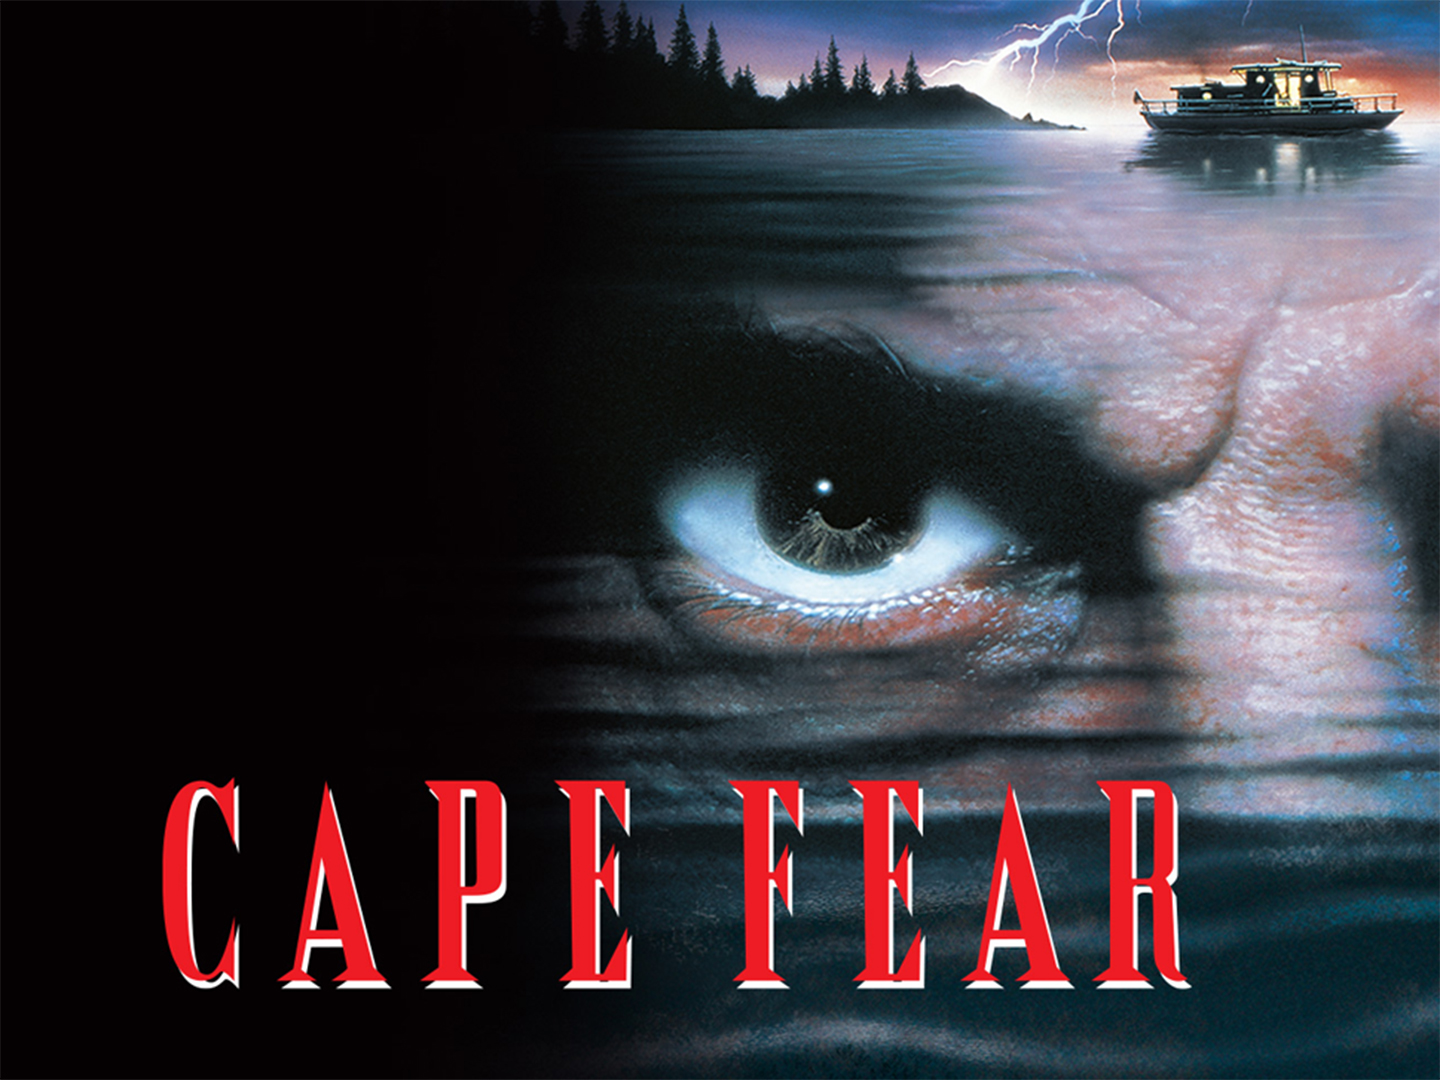 cape fear 1991 gregory peck